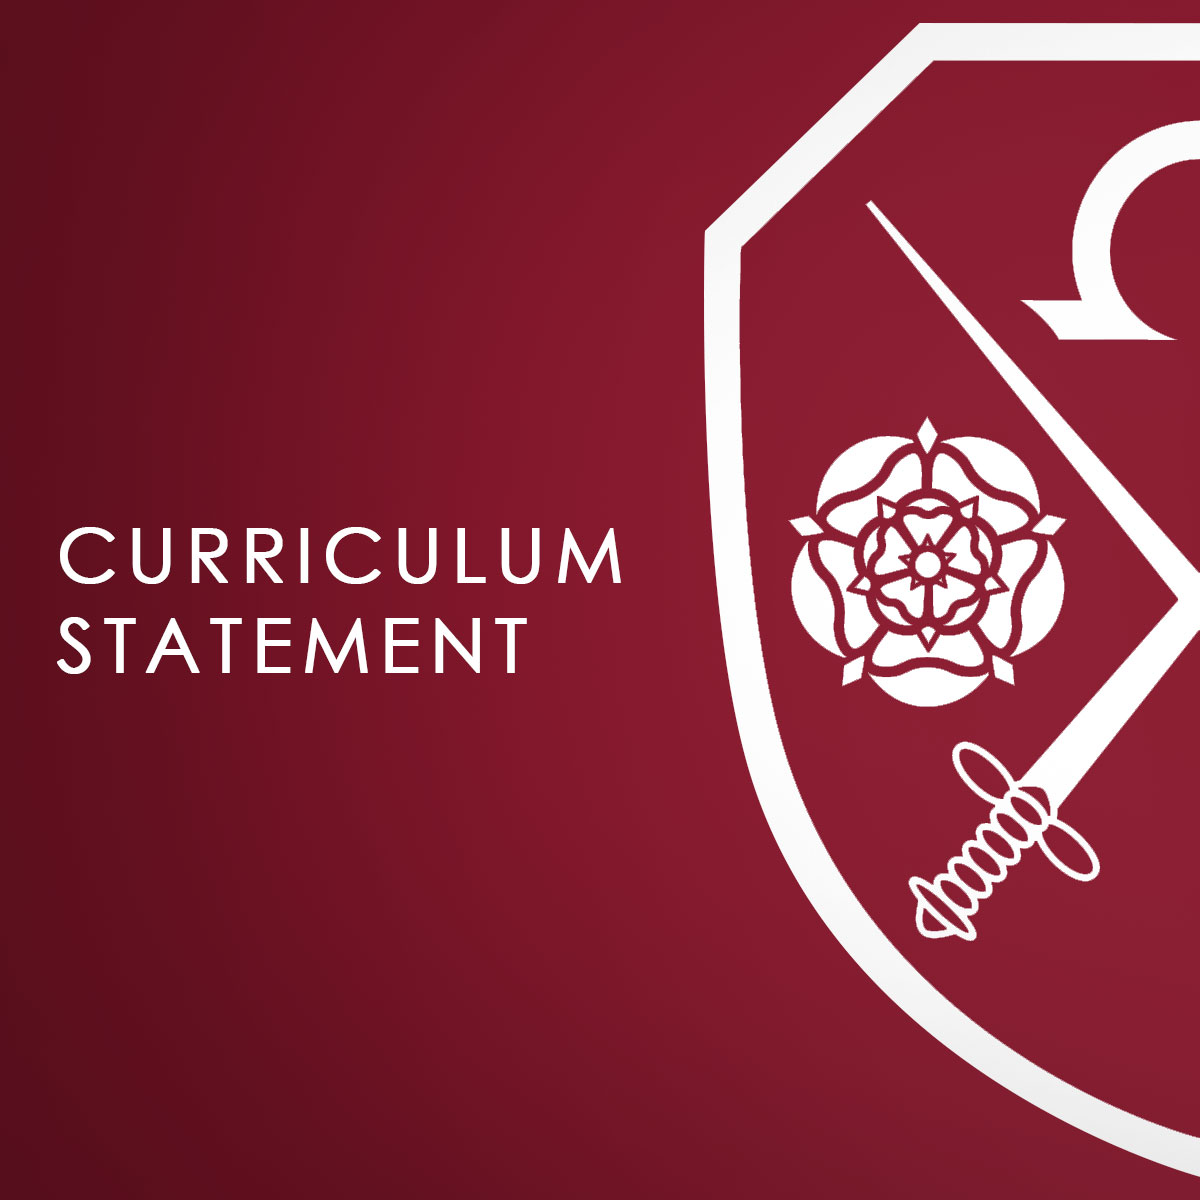 A maroon background with the East Barnet School logo which says East Barnet School's Curriculum Statement